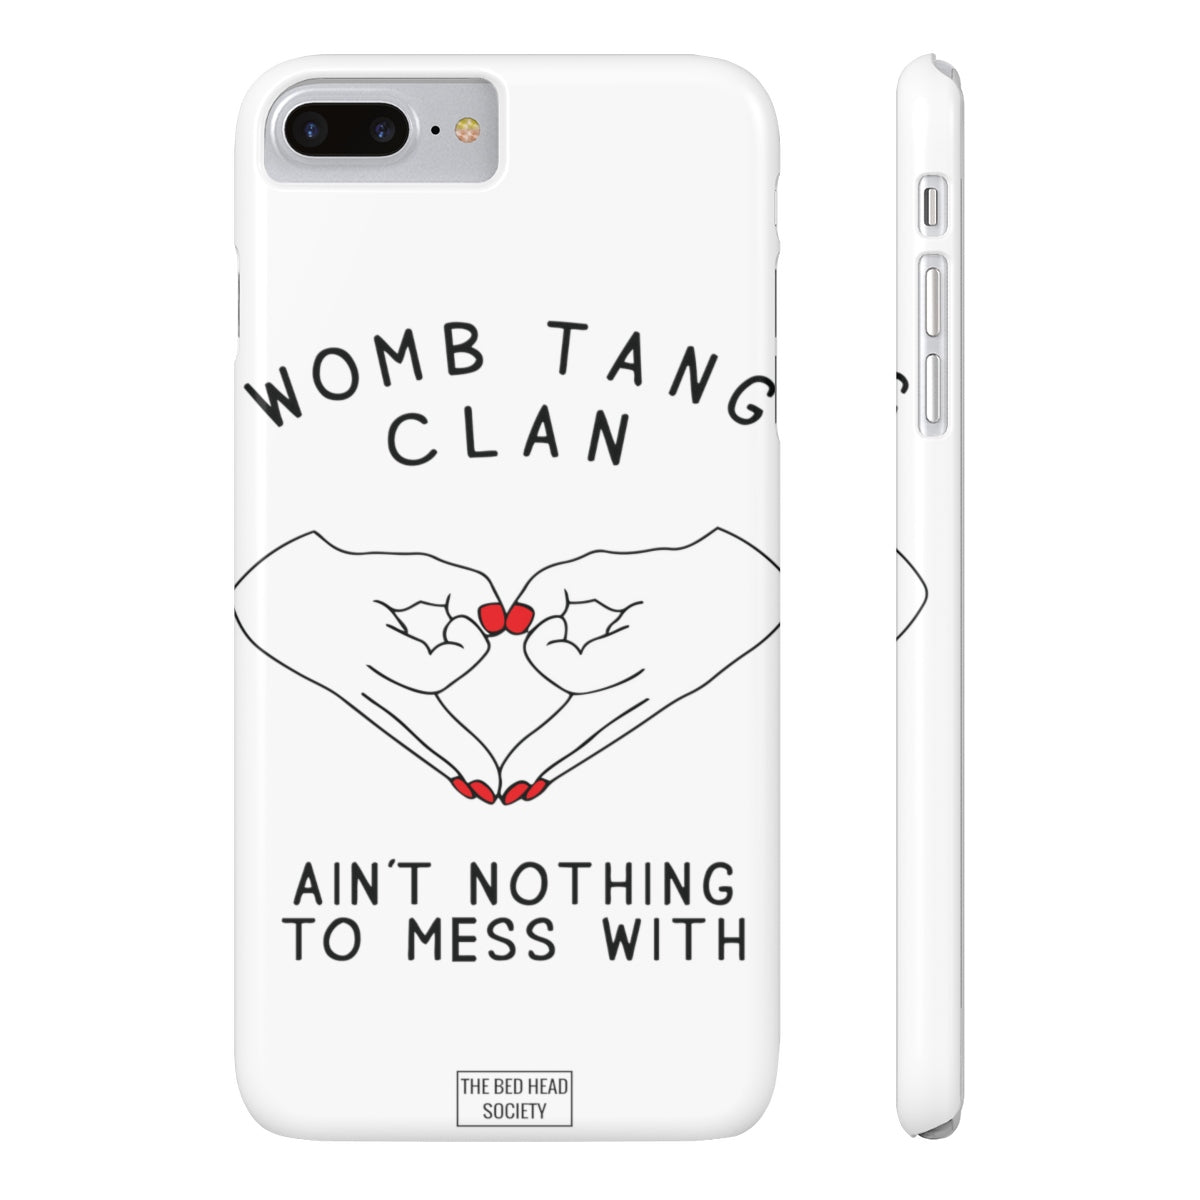 Womb Tang Slim Phone Case - Shop Bed Head Society